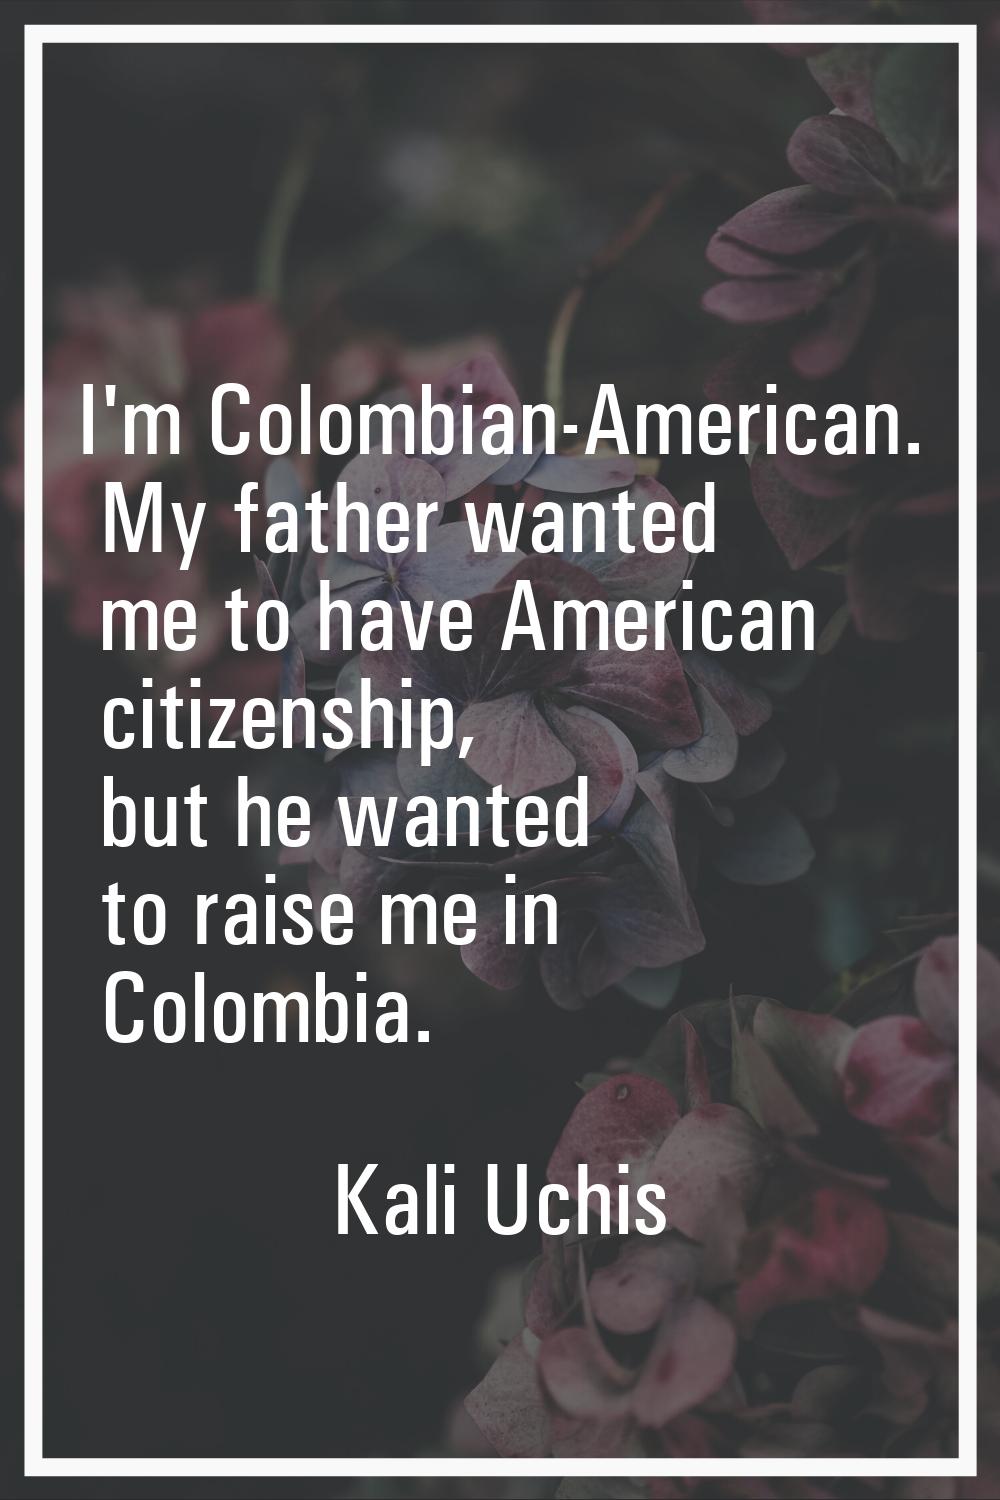 I'm Colombian-American. My father wanted me to have American citizenship, but he wanted to raise me